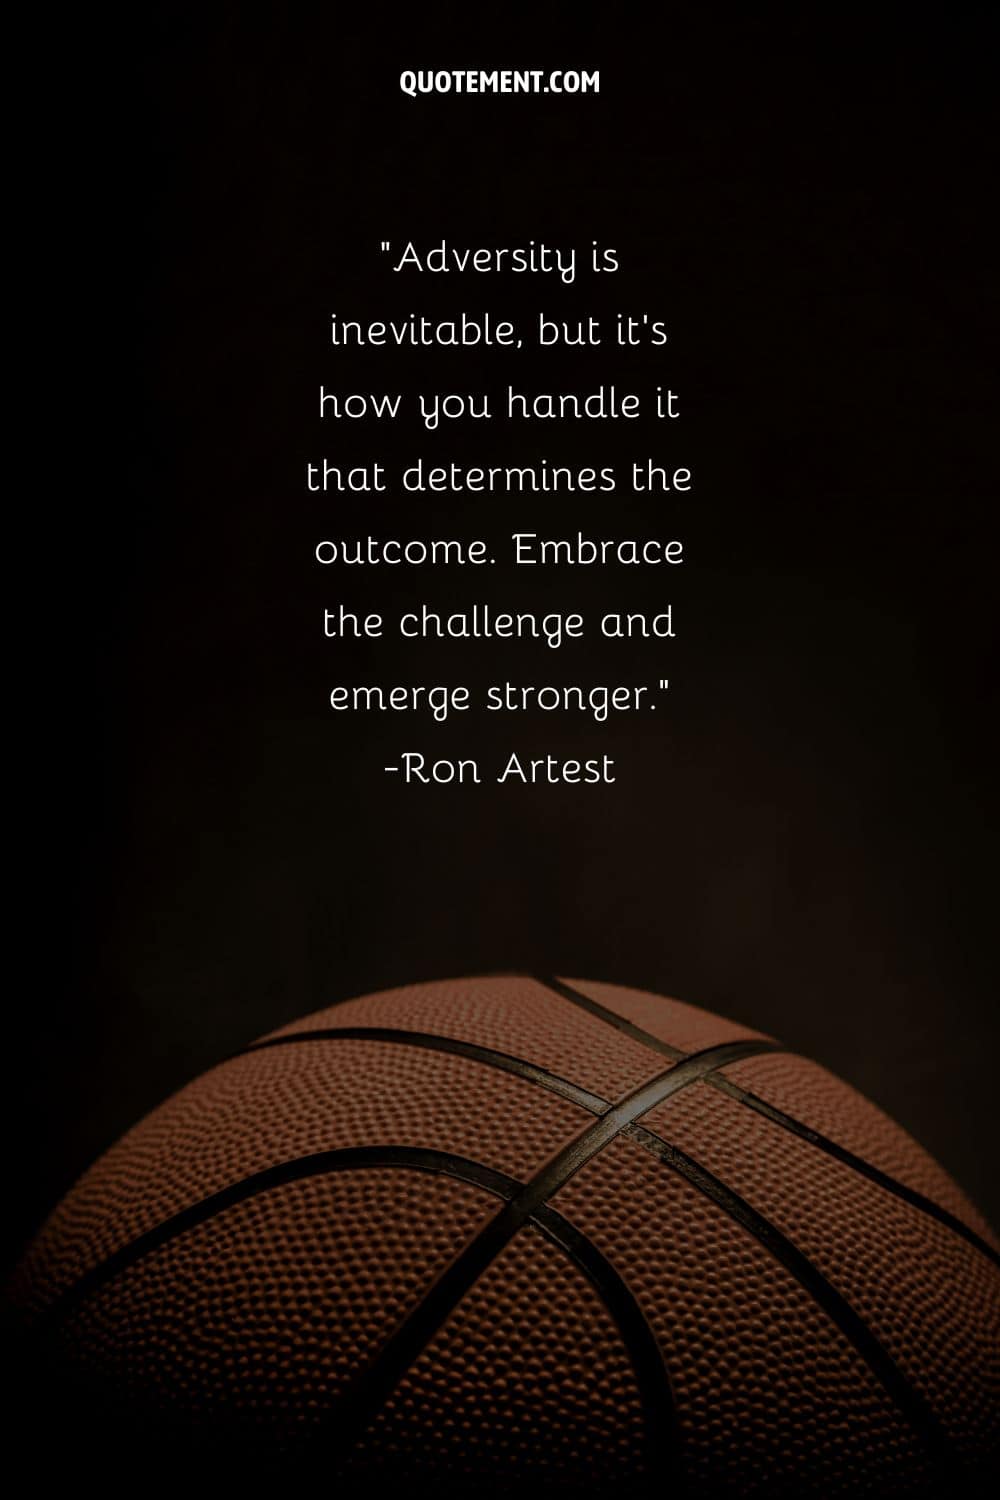 Adversity is inevitable, but it's how you handle it that determines the outcome. Embrace the challenge and emerge stronger.